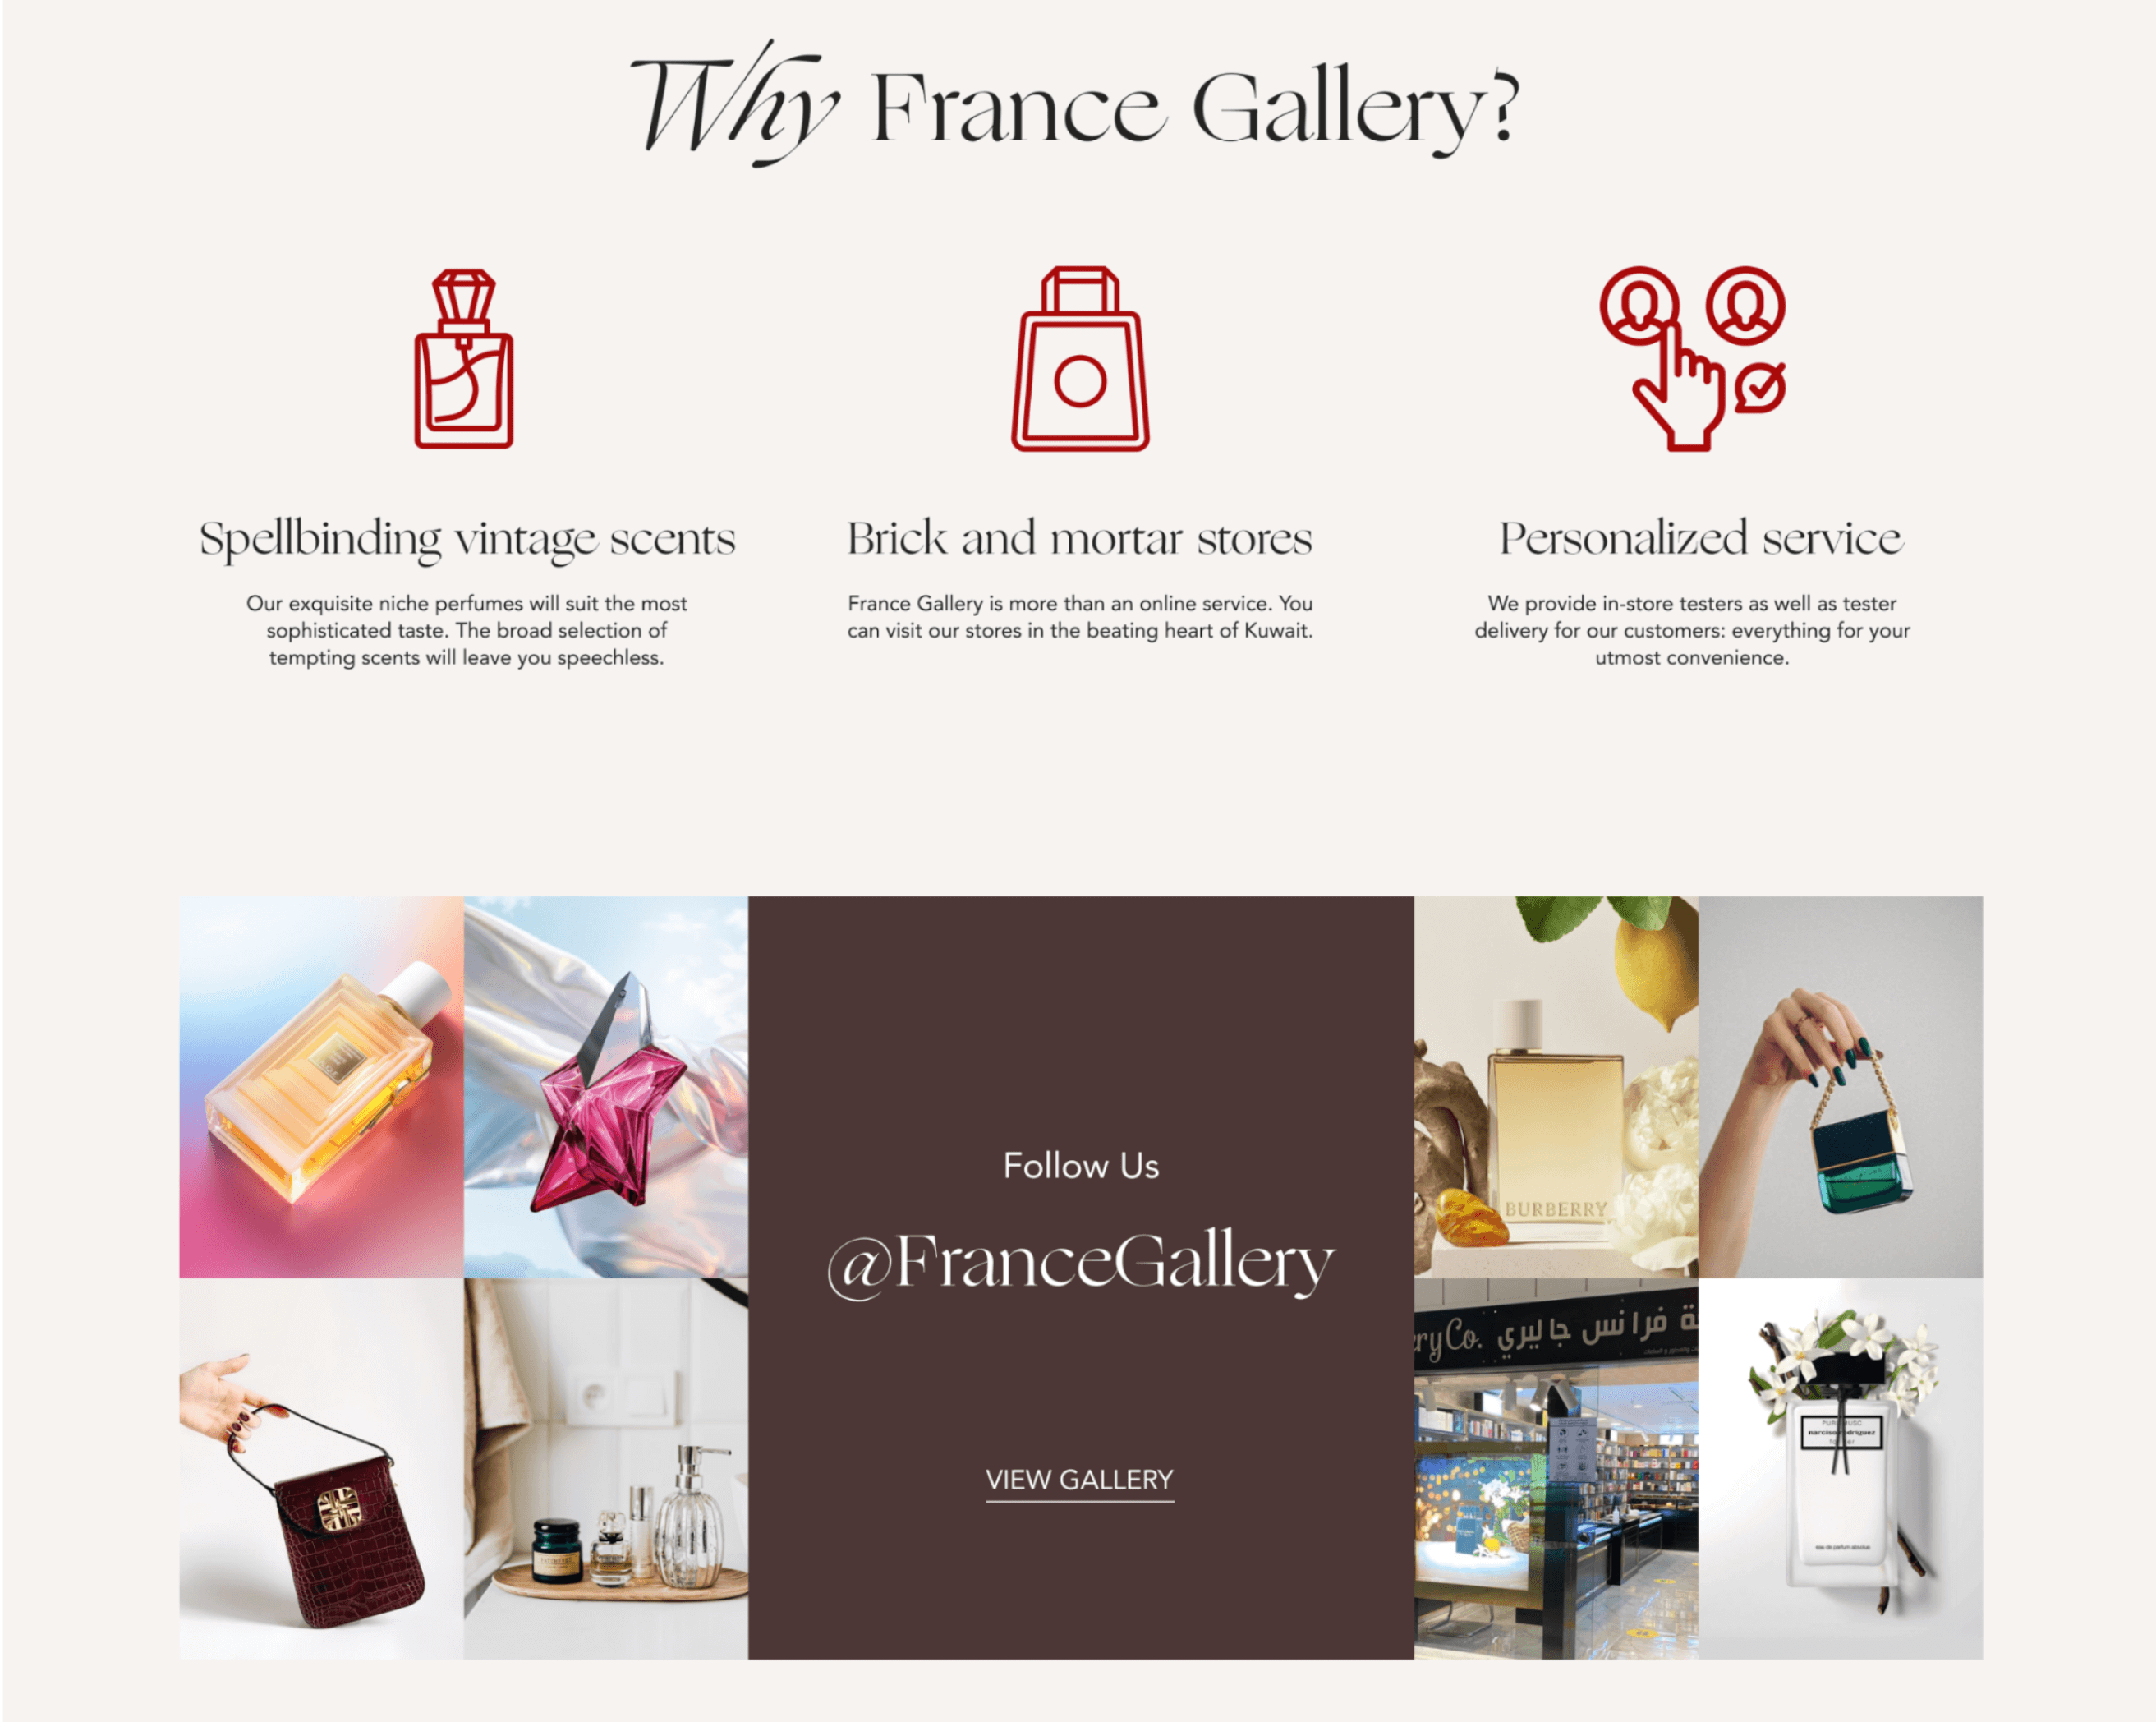 France Gallery case study